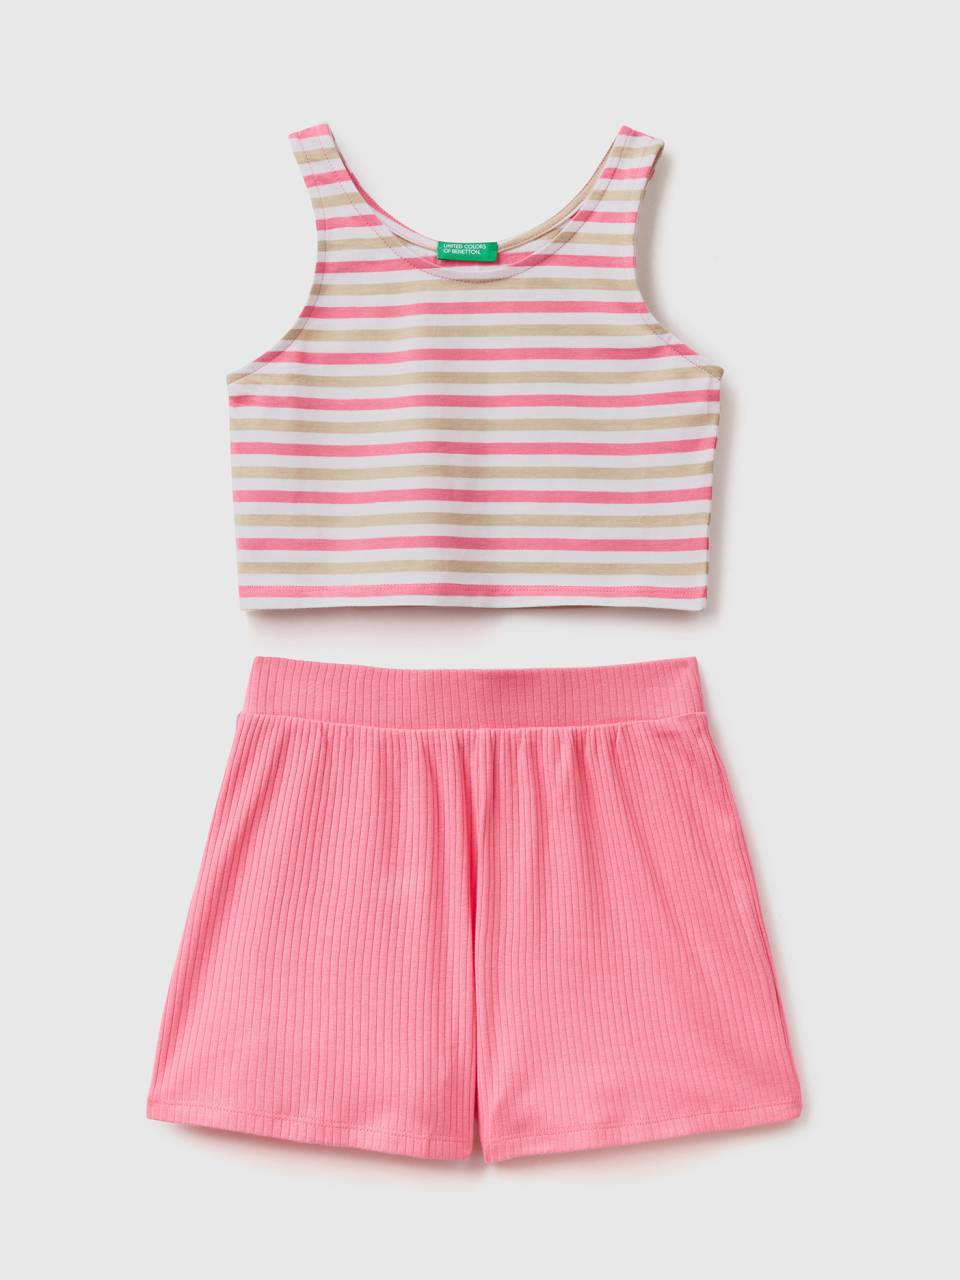 Benetton top and shorts set. 1